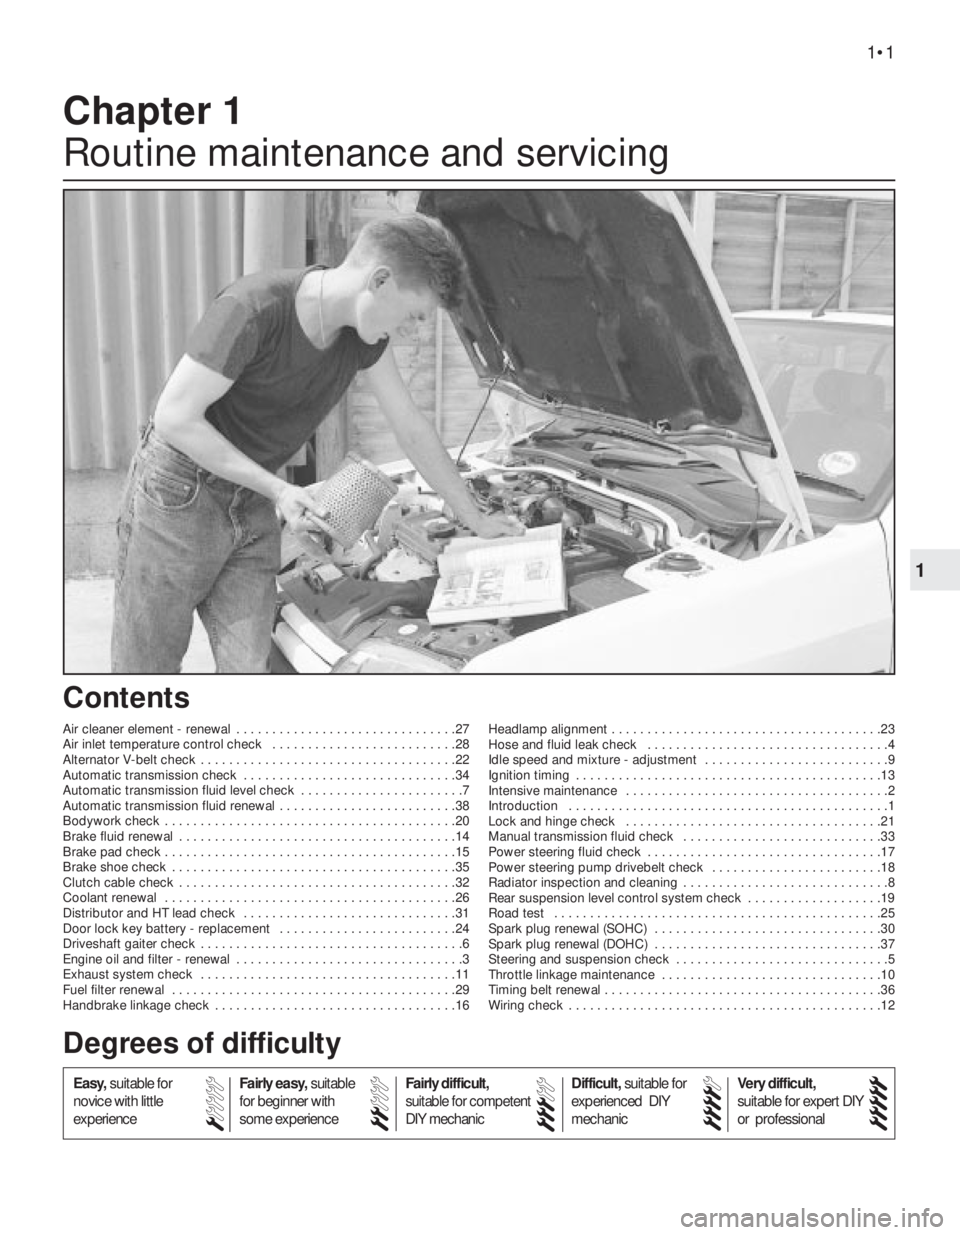 OPEL CALIBRA 1988  Service Repair Manual 1
Chapter 1
Routine maintenance and servicing
Air cleaner element - renewal  . . . . . . . . . . . . . . . . . . . . . . . . . . . . . . .27
Air inlet temperature control check  . . . . . . . . . . . 